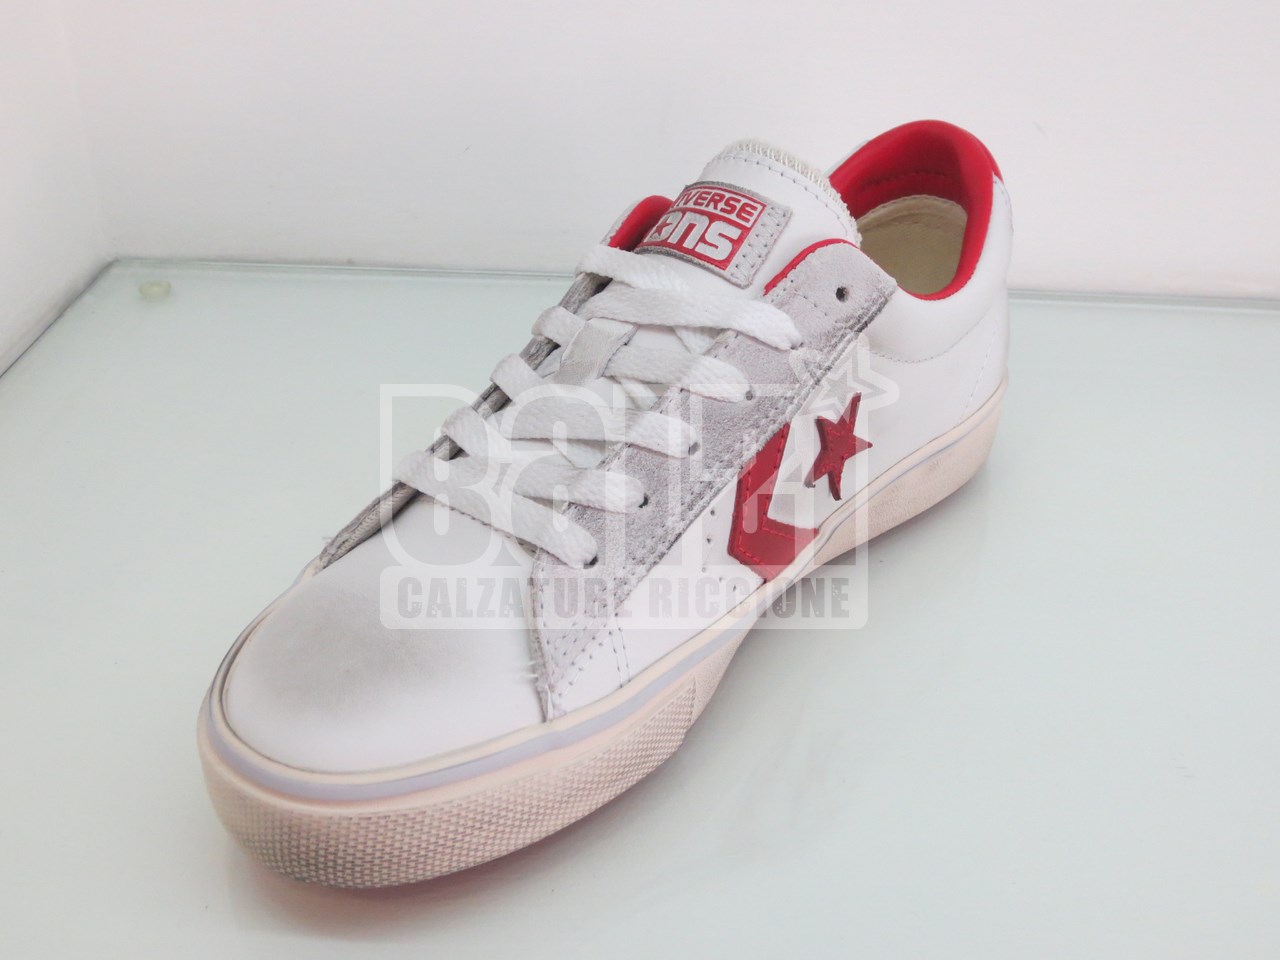 converse pro leather rosse